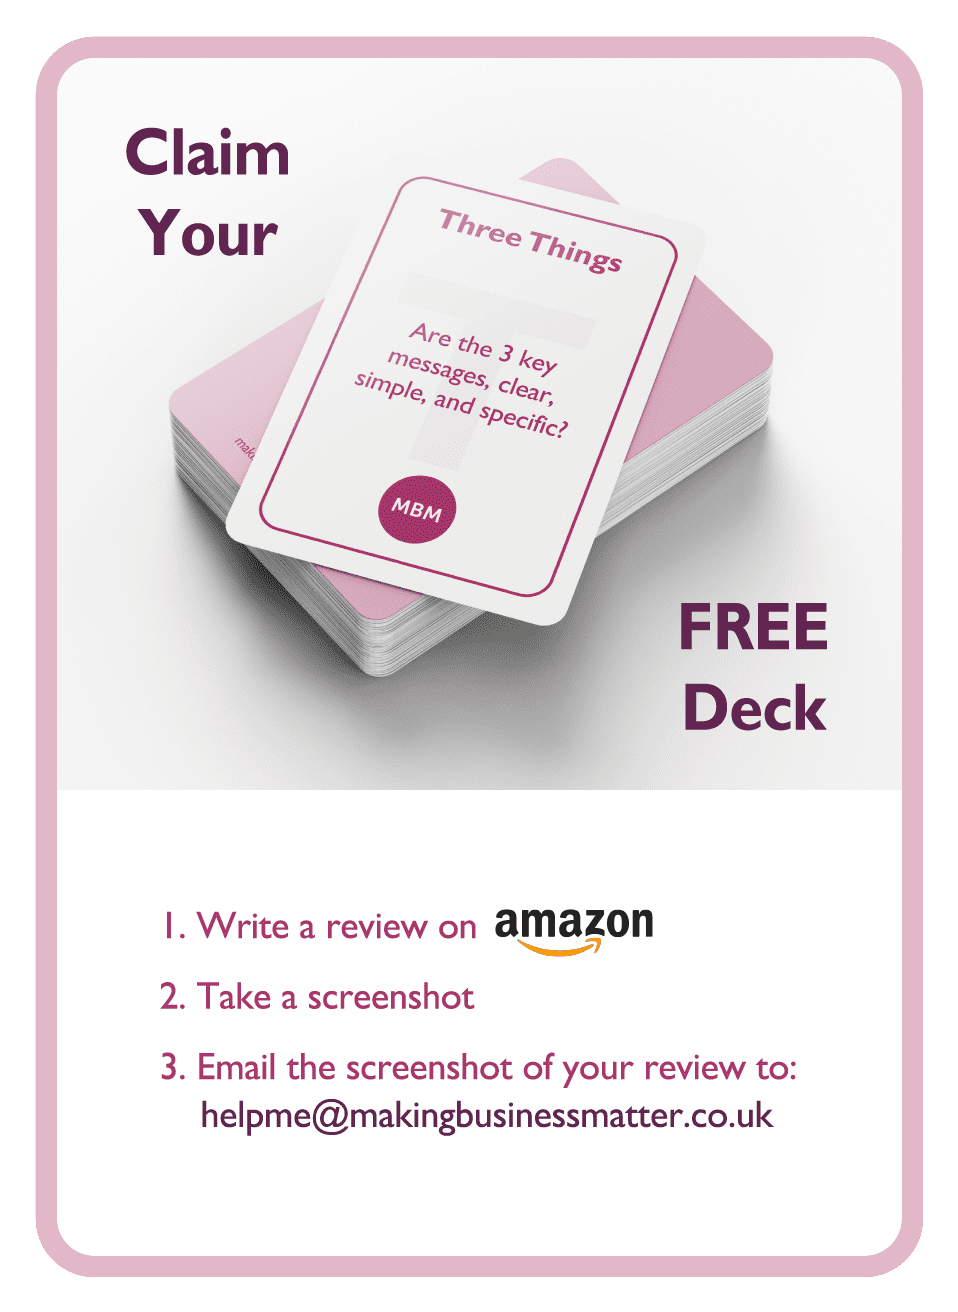 Coaching card titled Claim your free deck